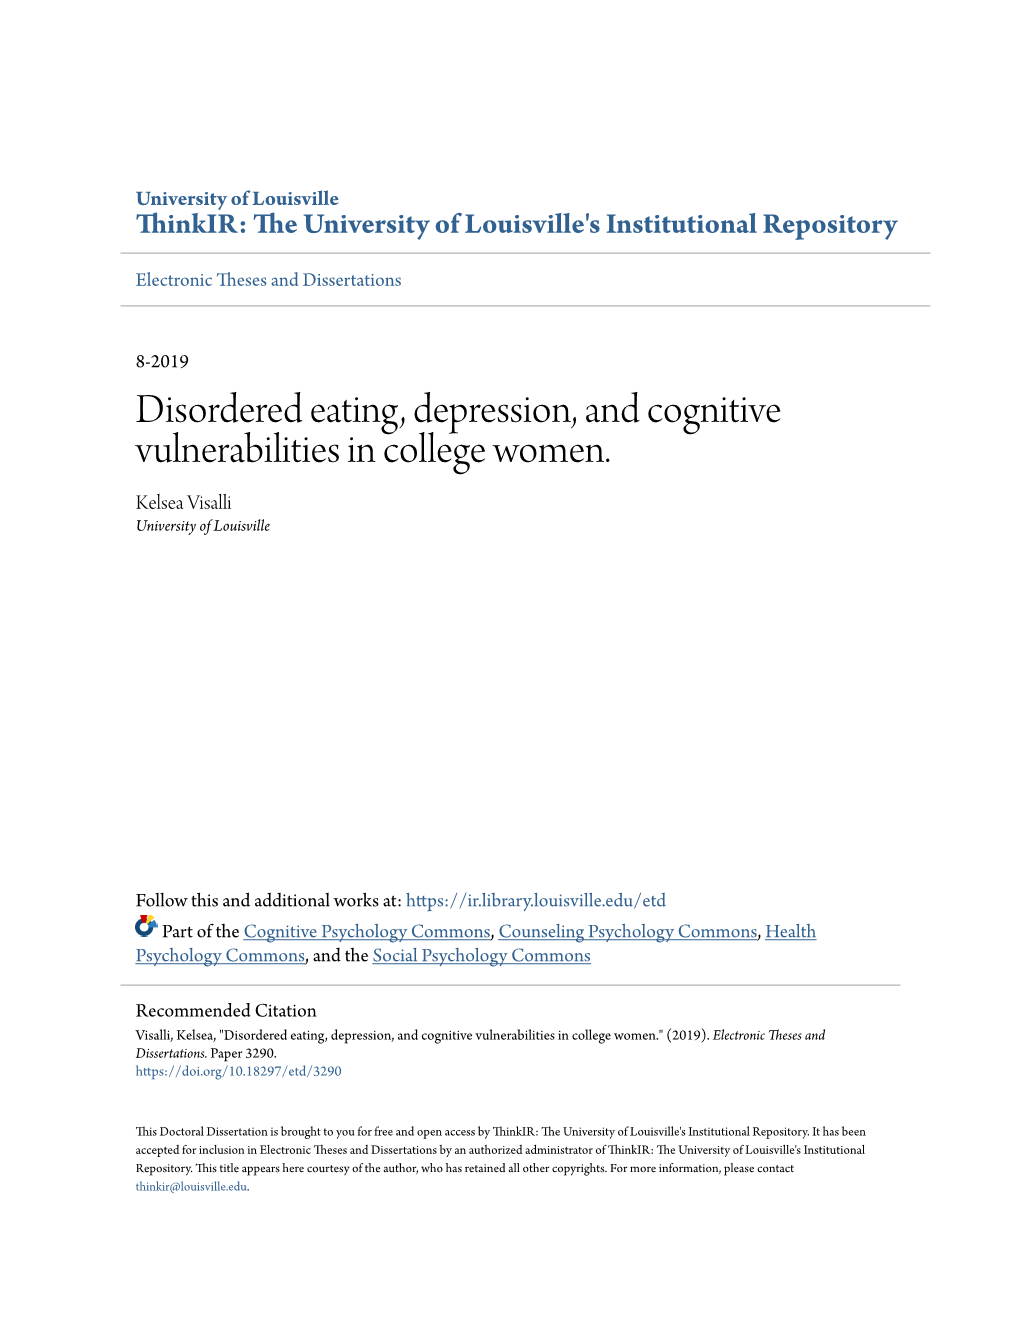 Disordered Eating, Depression, and Cognitive Vulnerabilities in College Women